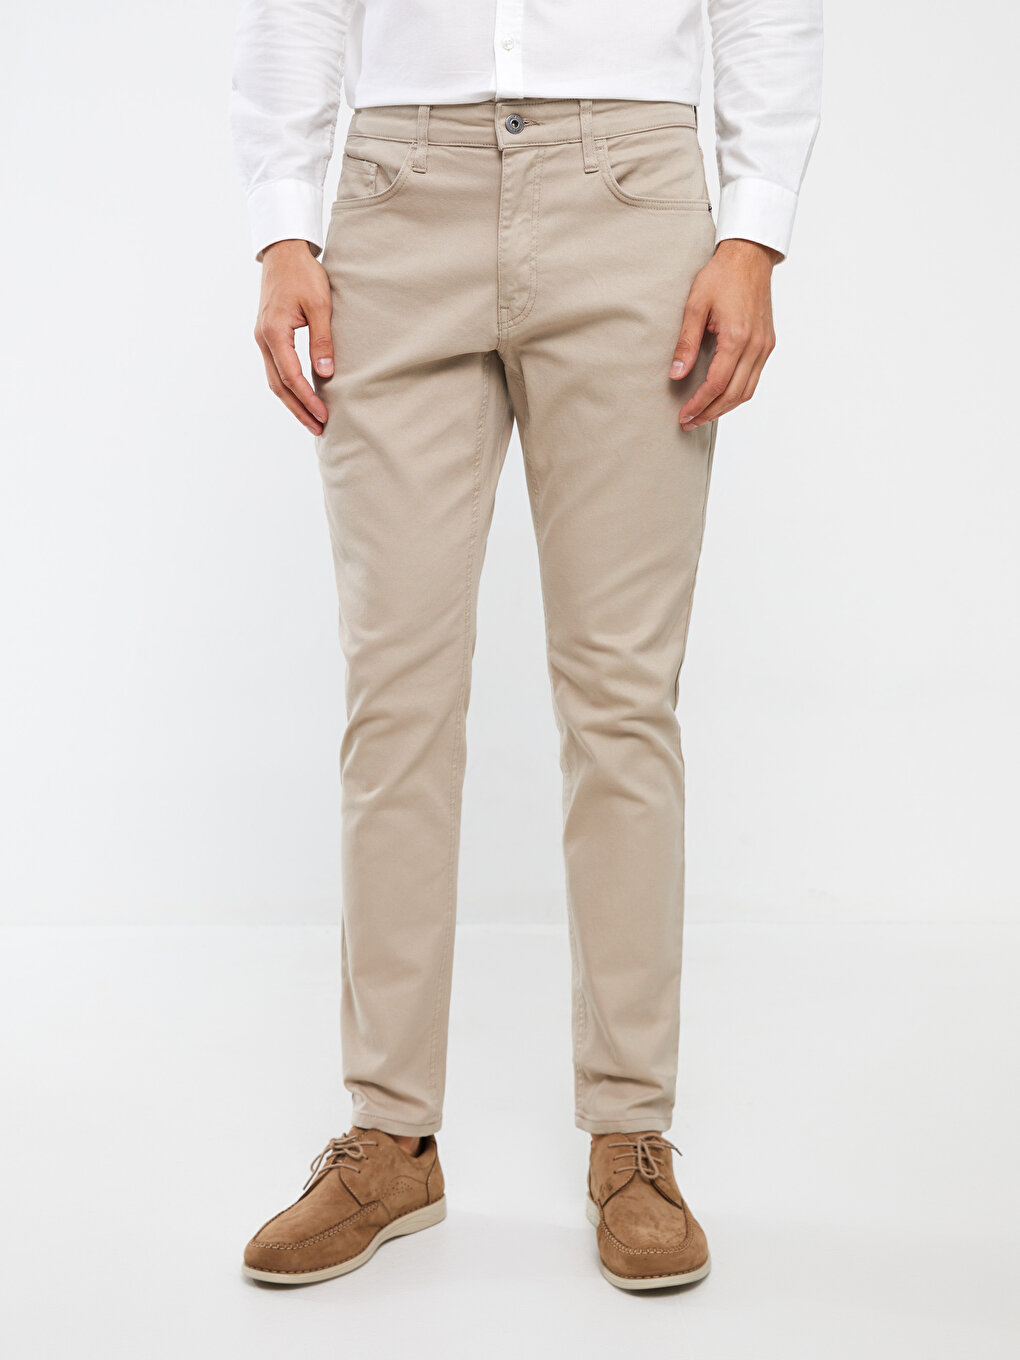 Victorious Men's Basic Trousers Casual Slim Fit Stretch Chino Pants DL1250  | eBay